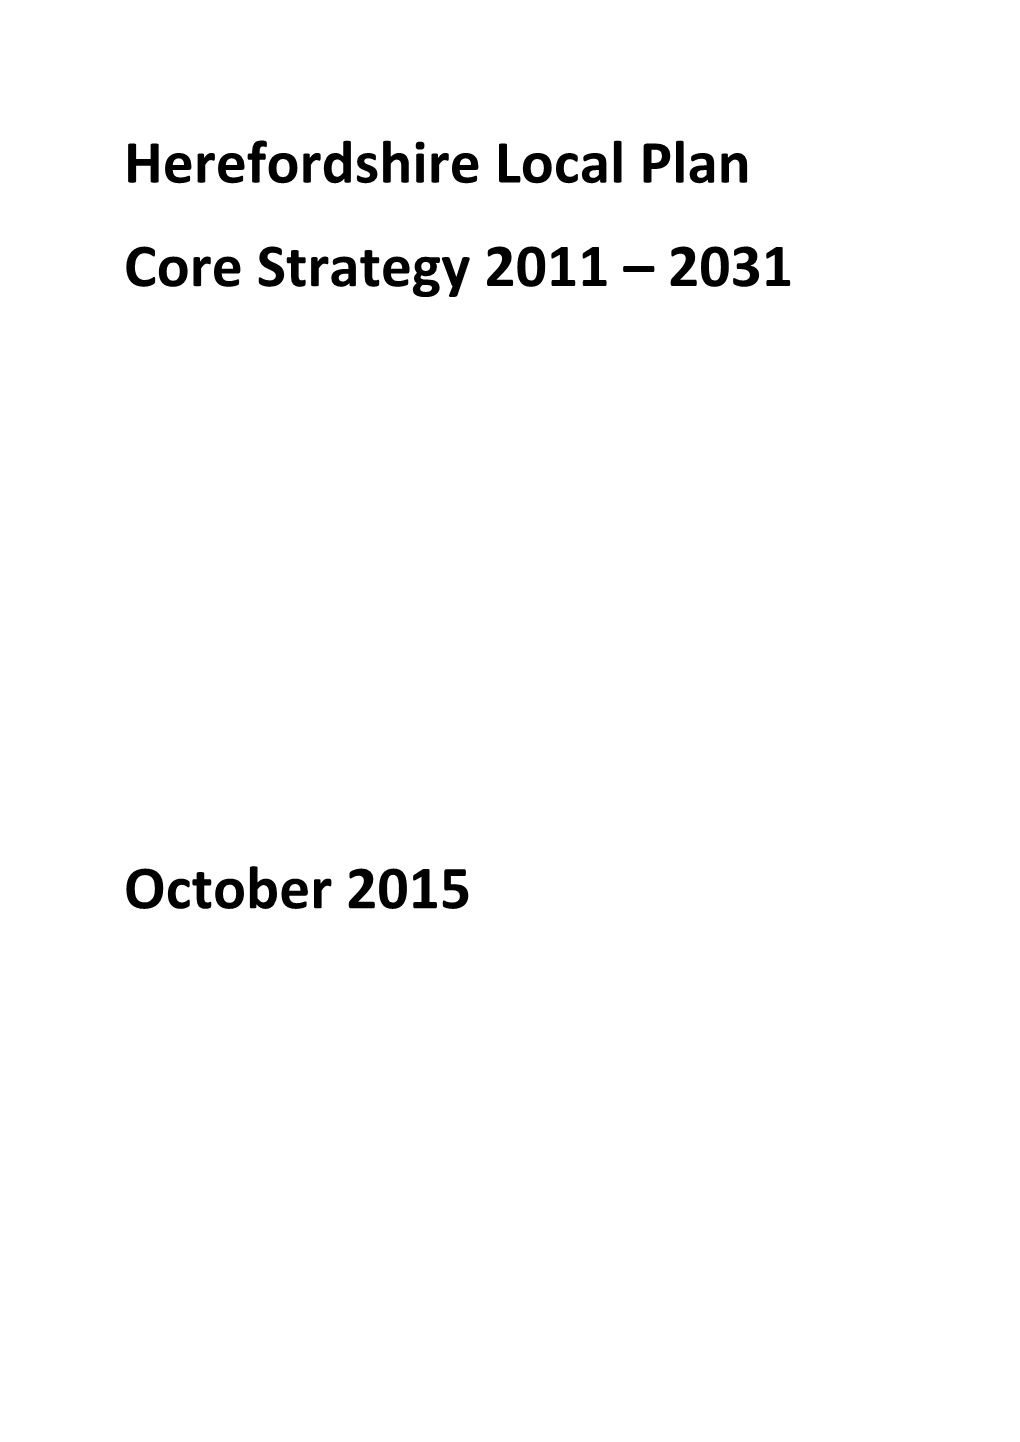 Herefordshire Local Plan Core Strategy 2011 – 2031 October 2015